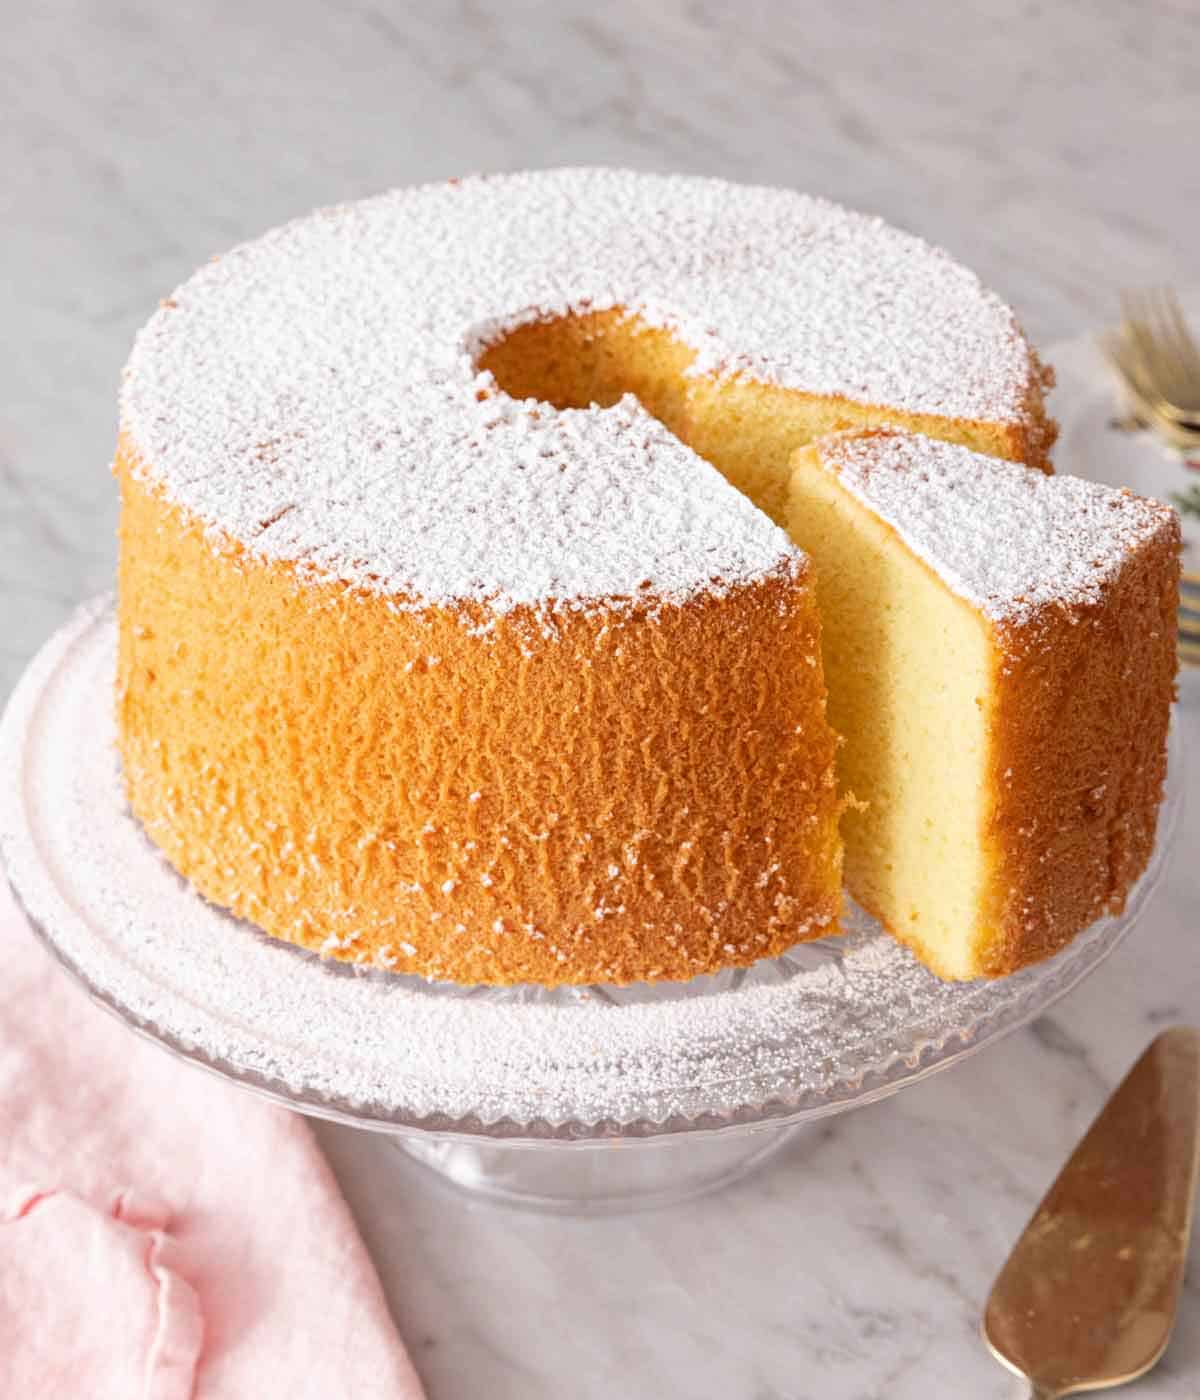 A chiffon cake dusted with powdered sugar with a slice cut and pulled forward.